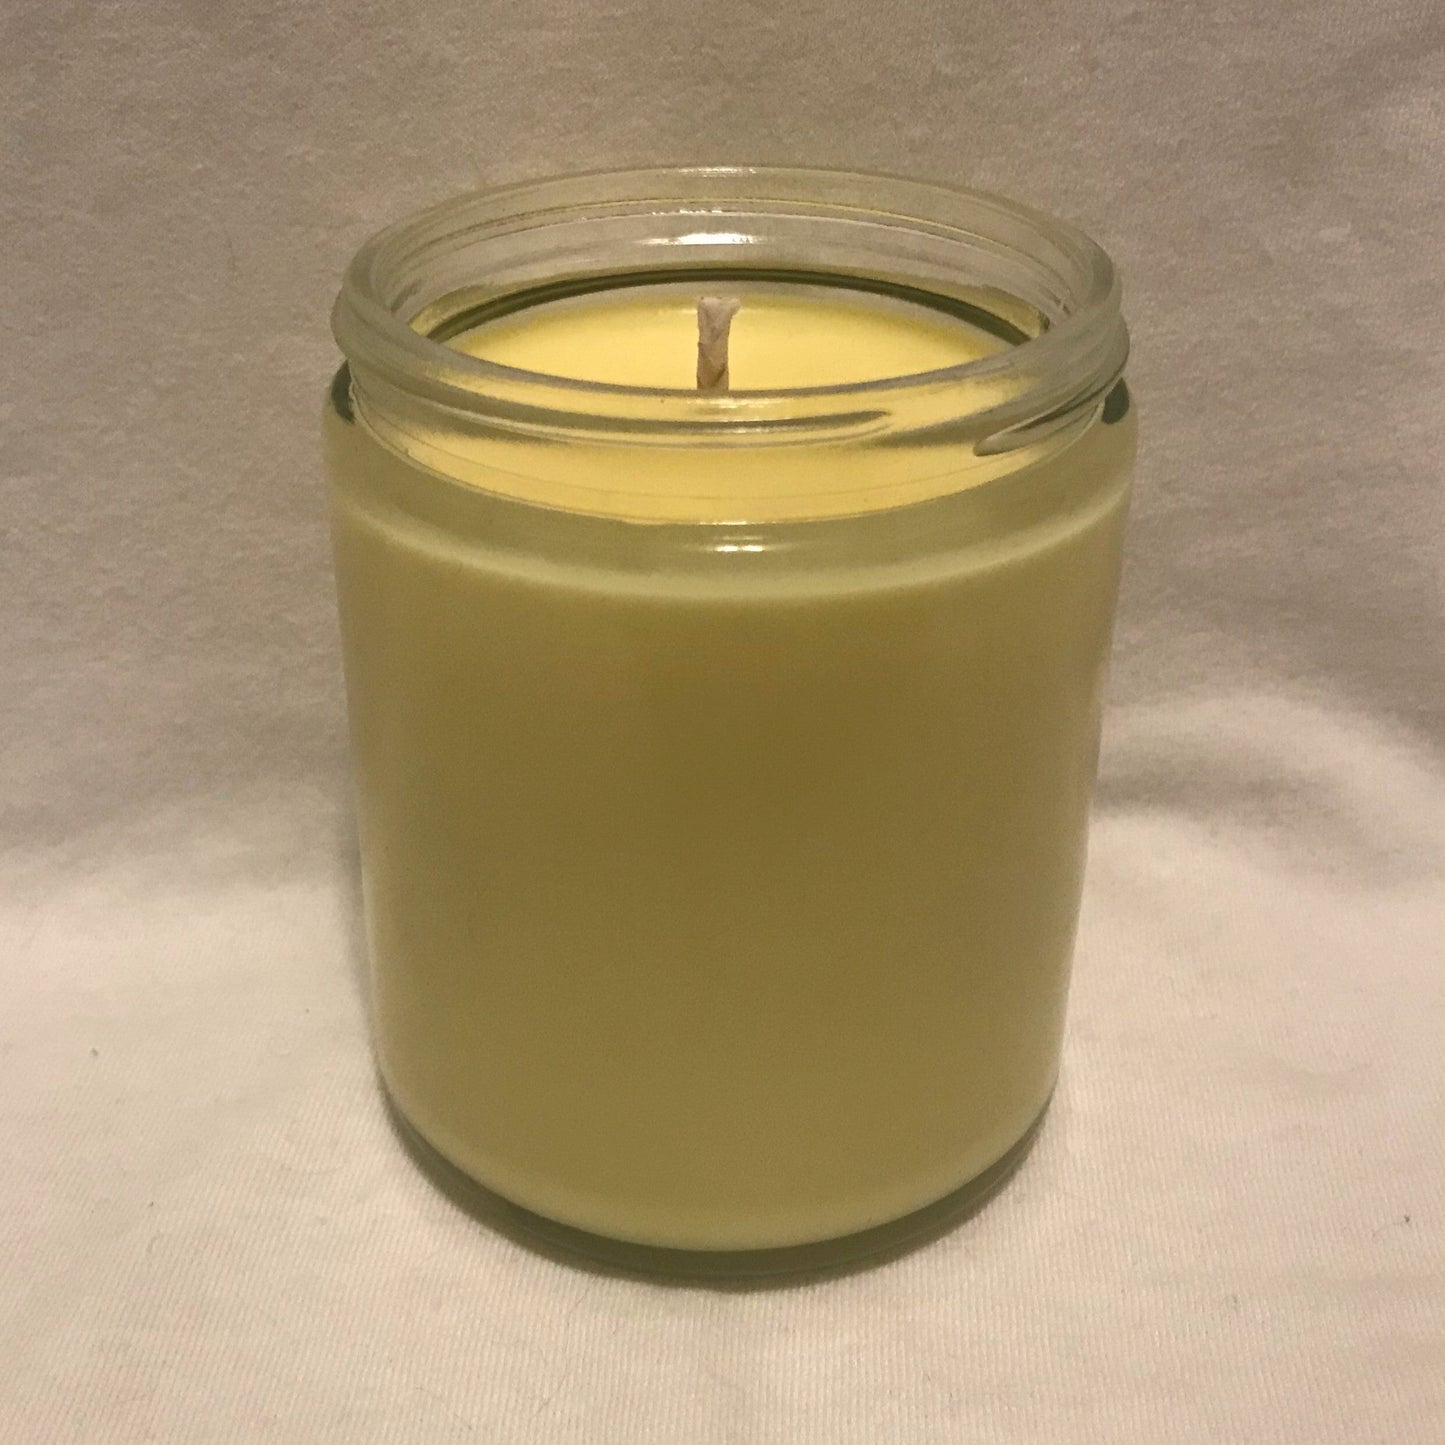 Pawsi Vibes Candle